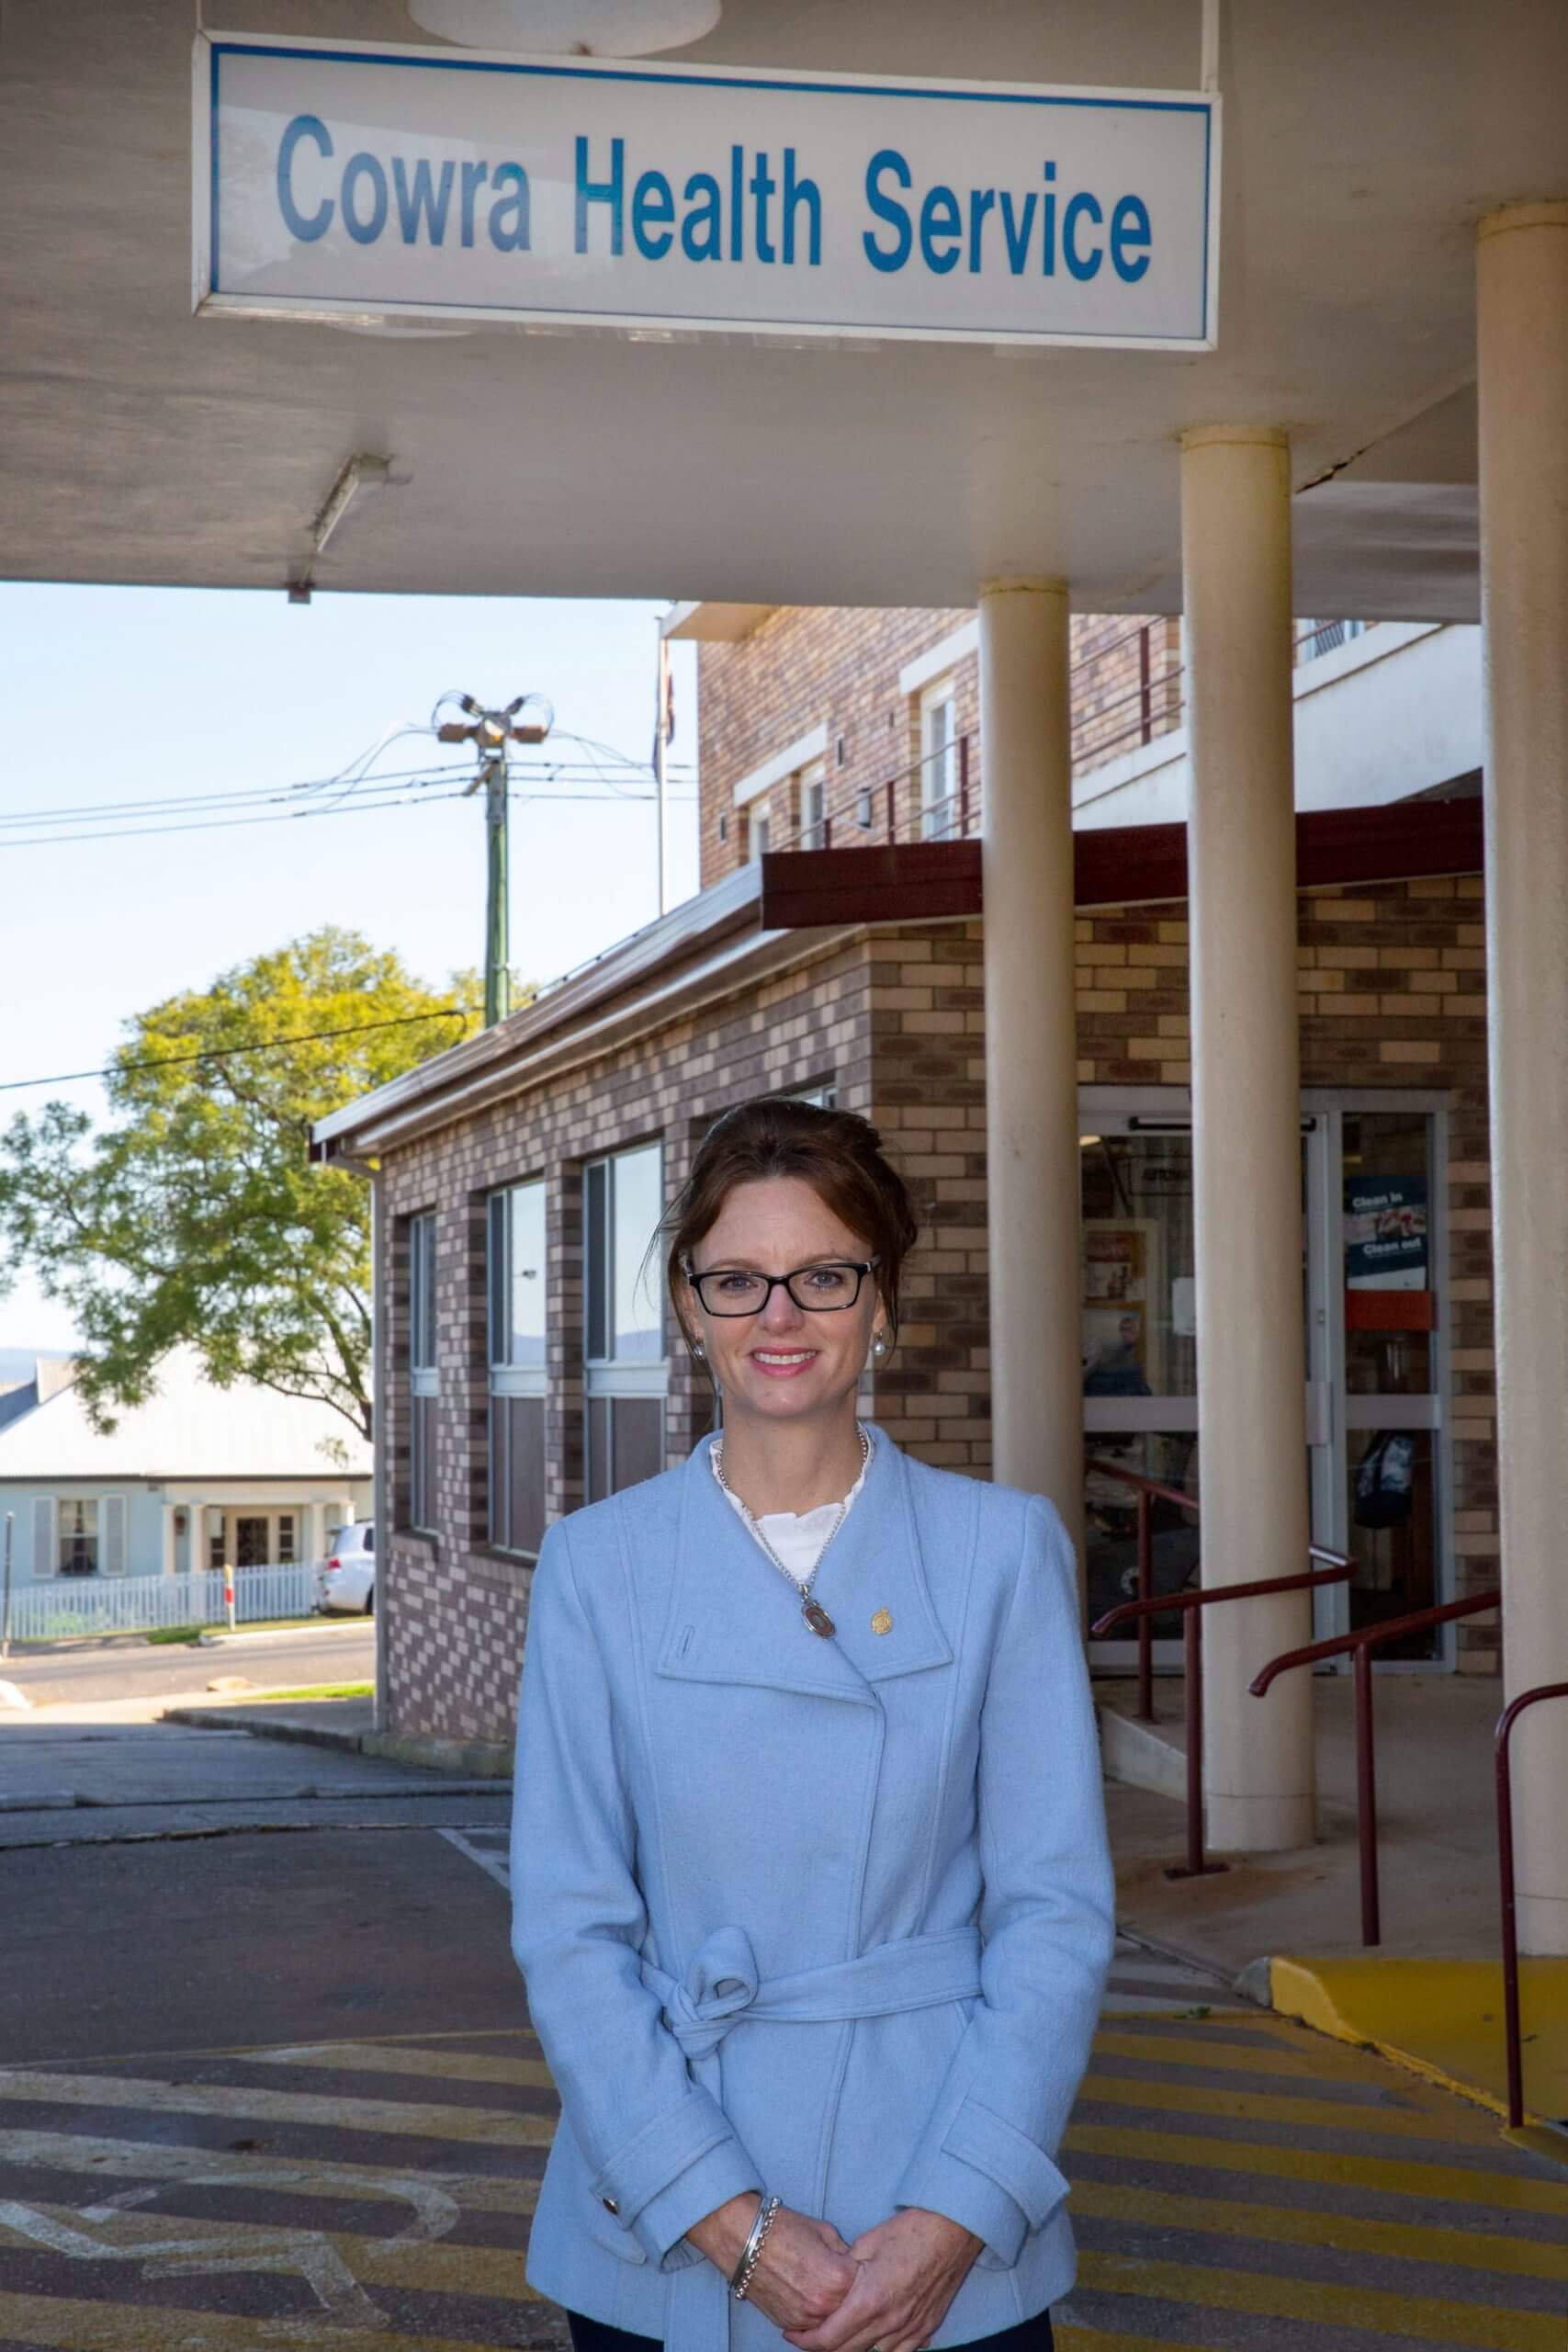 Steph Cooke stands under the sign for the Cowra Health Service. She wears a pale blue jacket and smiles at the camera. The hospital entrance can be seen in the background.